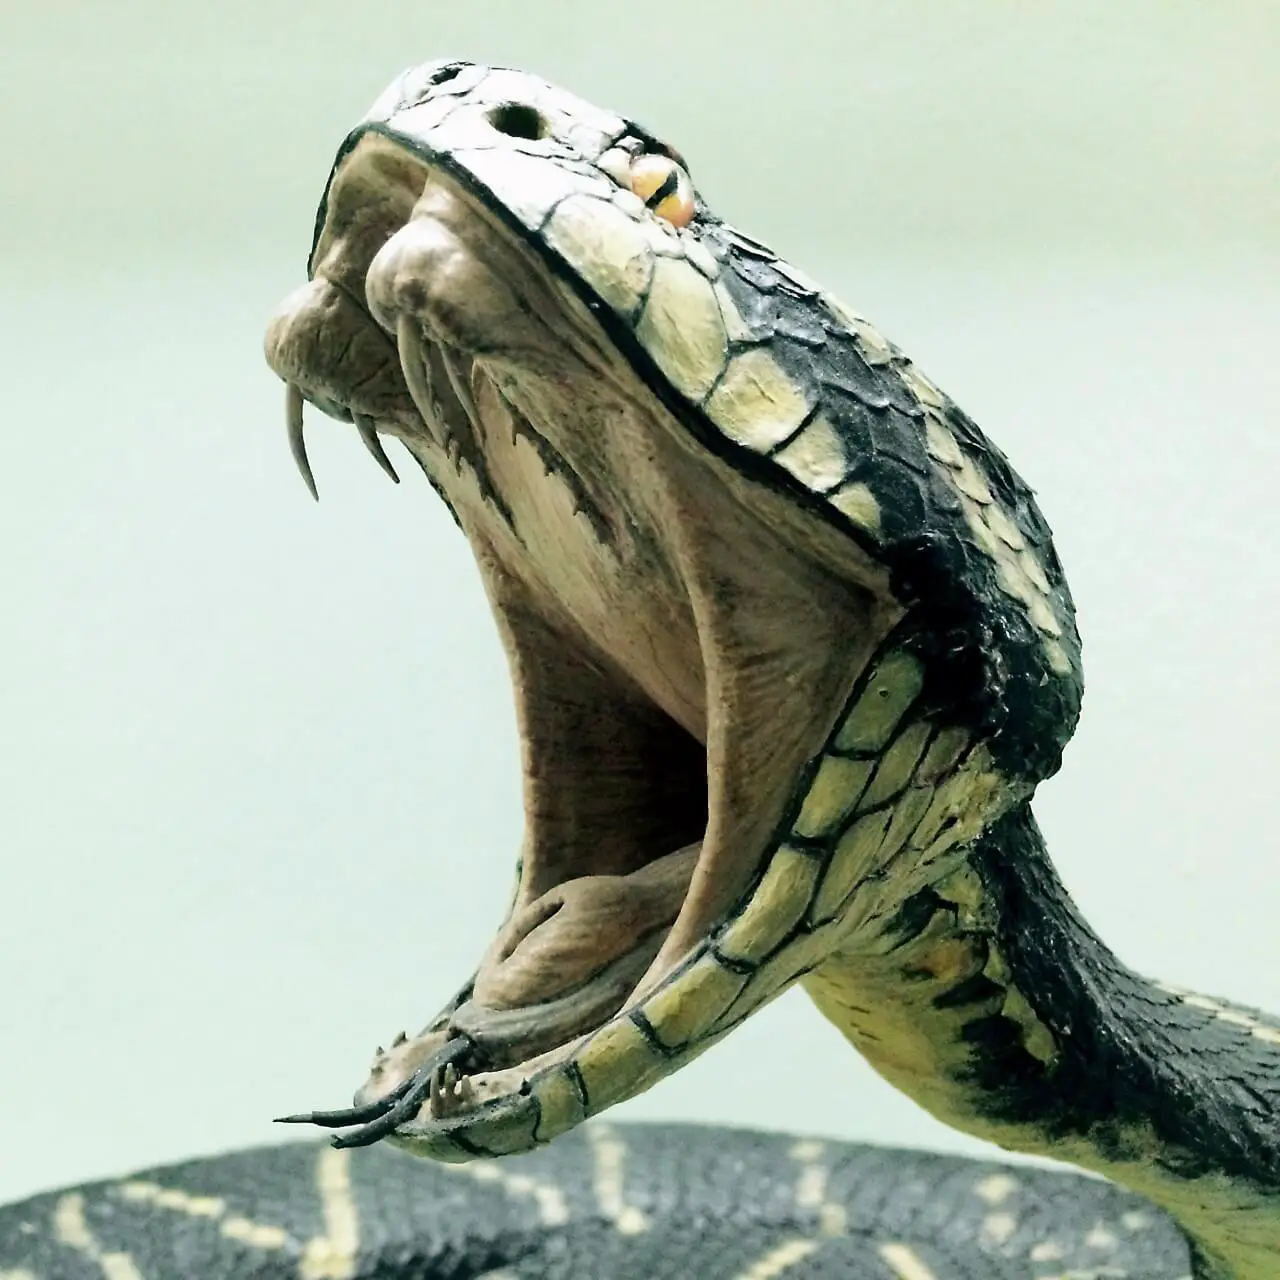 Cobra with detailed view of fangs and venom as it prepares to strike.